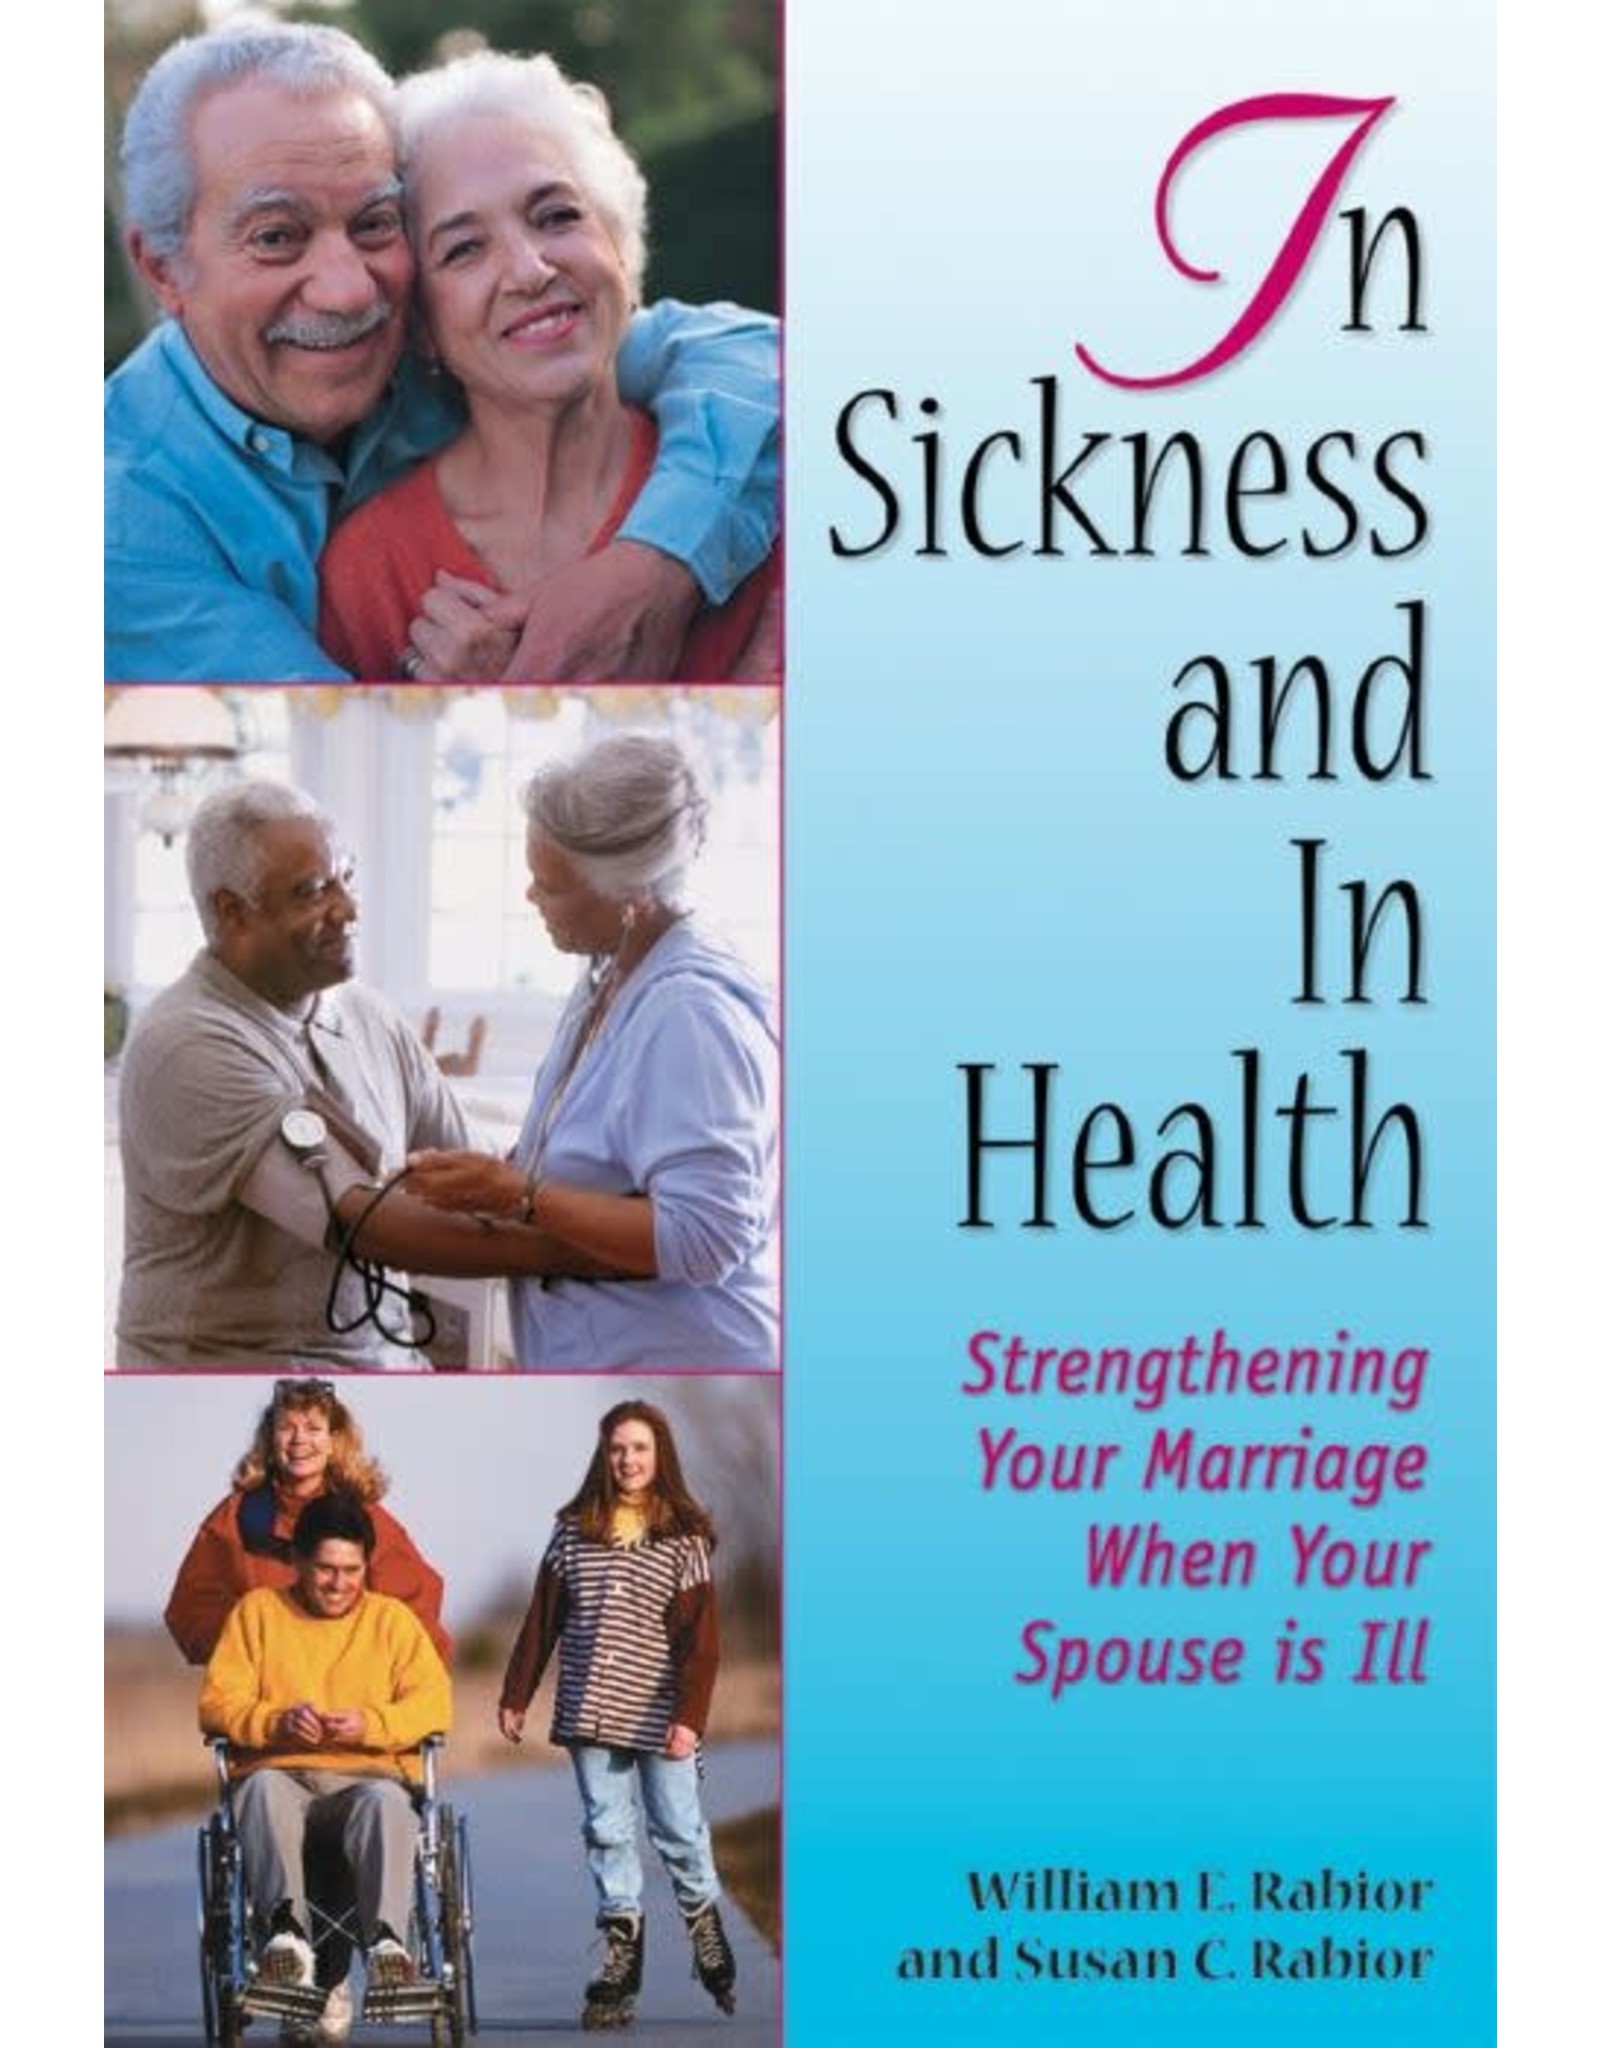 In Sickness & in Health: Strengthening Your Marriage When Your Spouse Is Ill